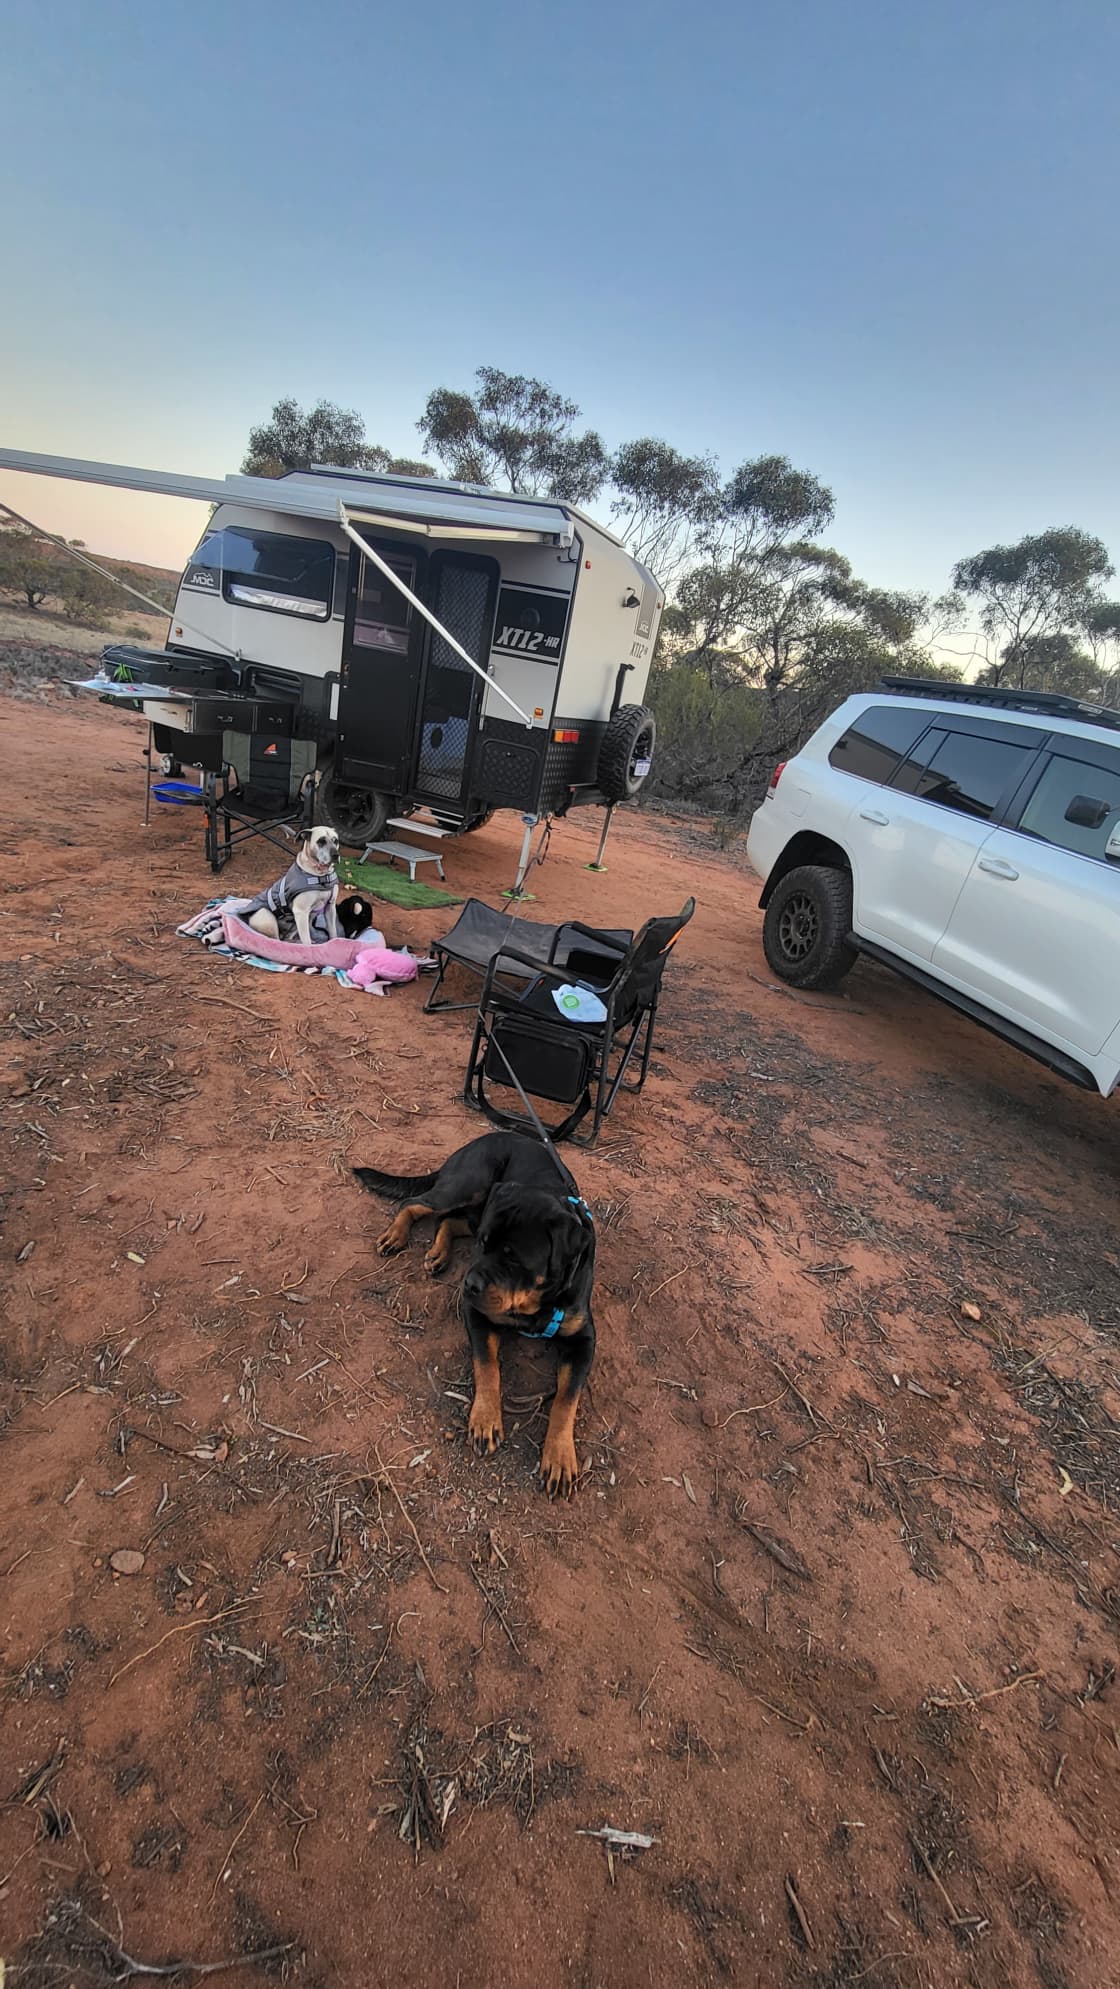 Dog friendly, camp grounds solid for caravan